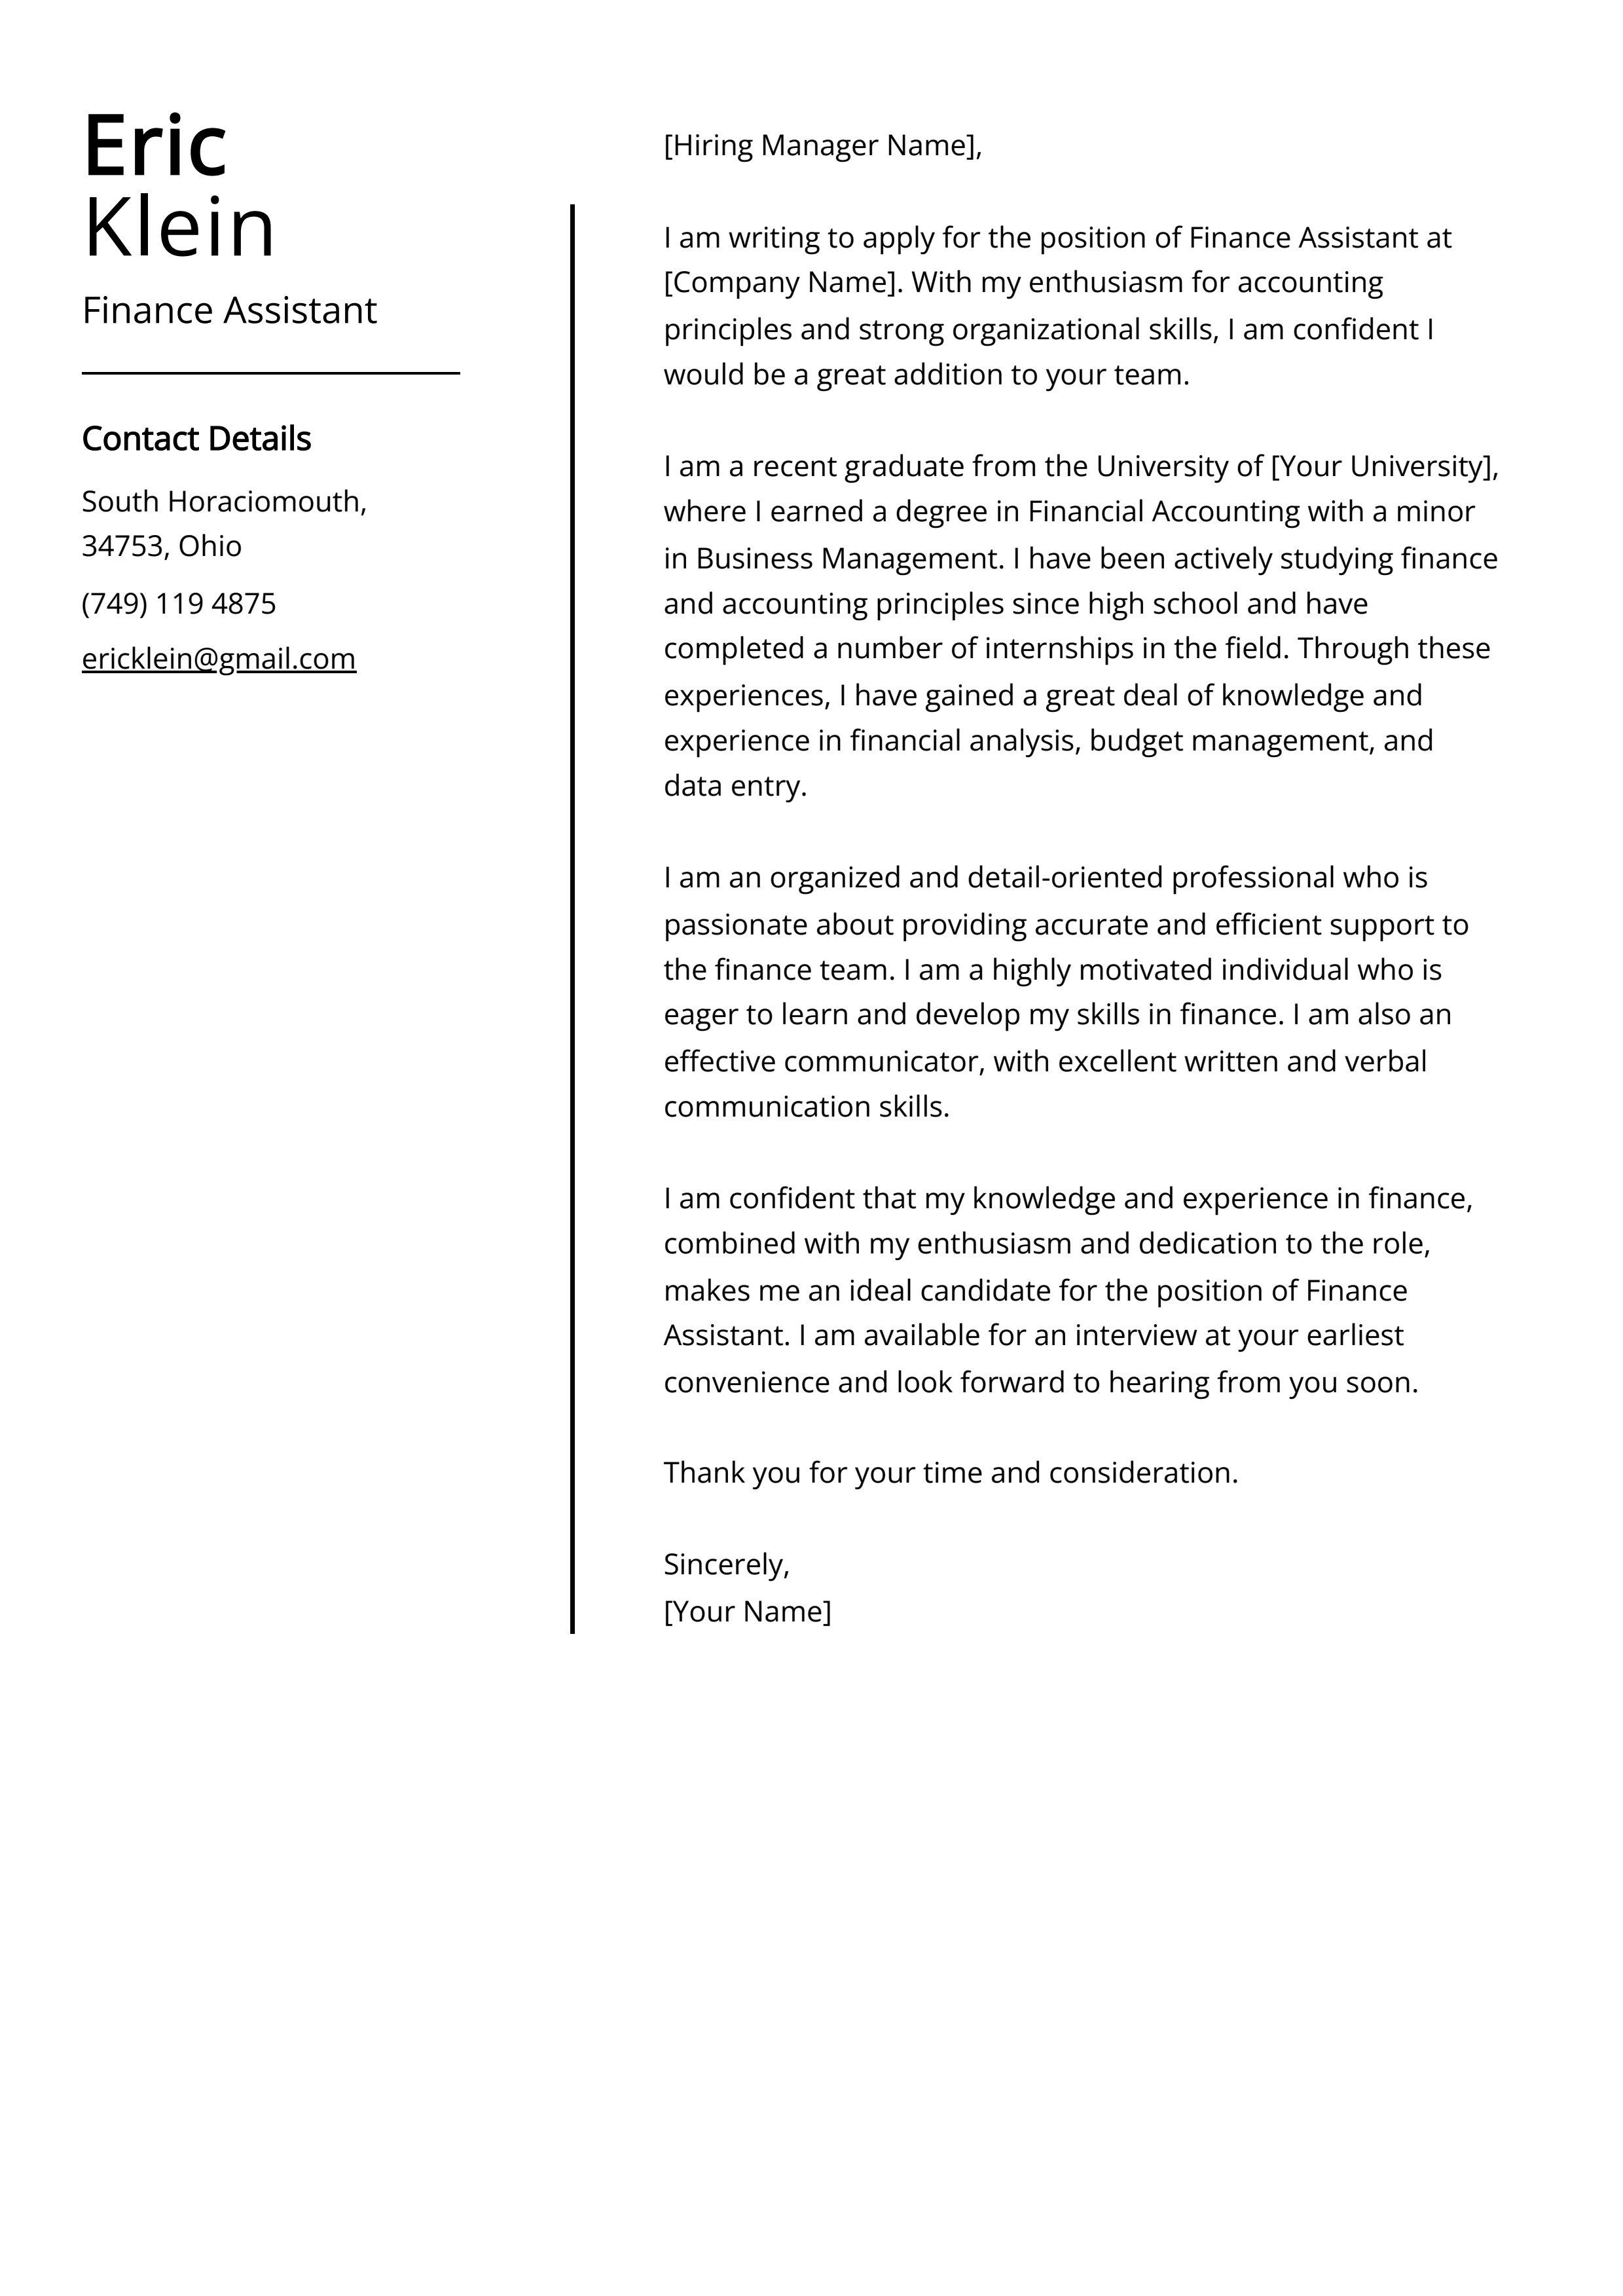 Finance Assistant Cover Letter Example